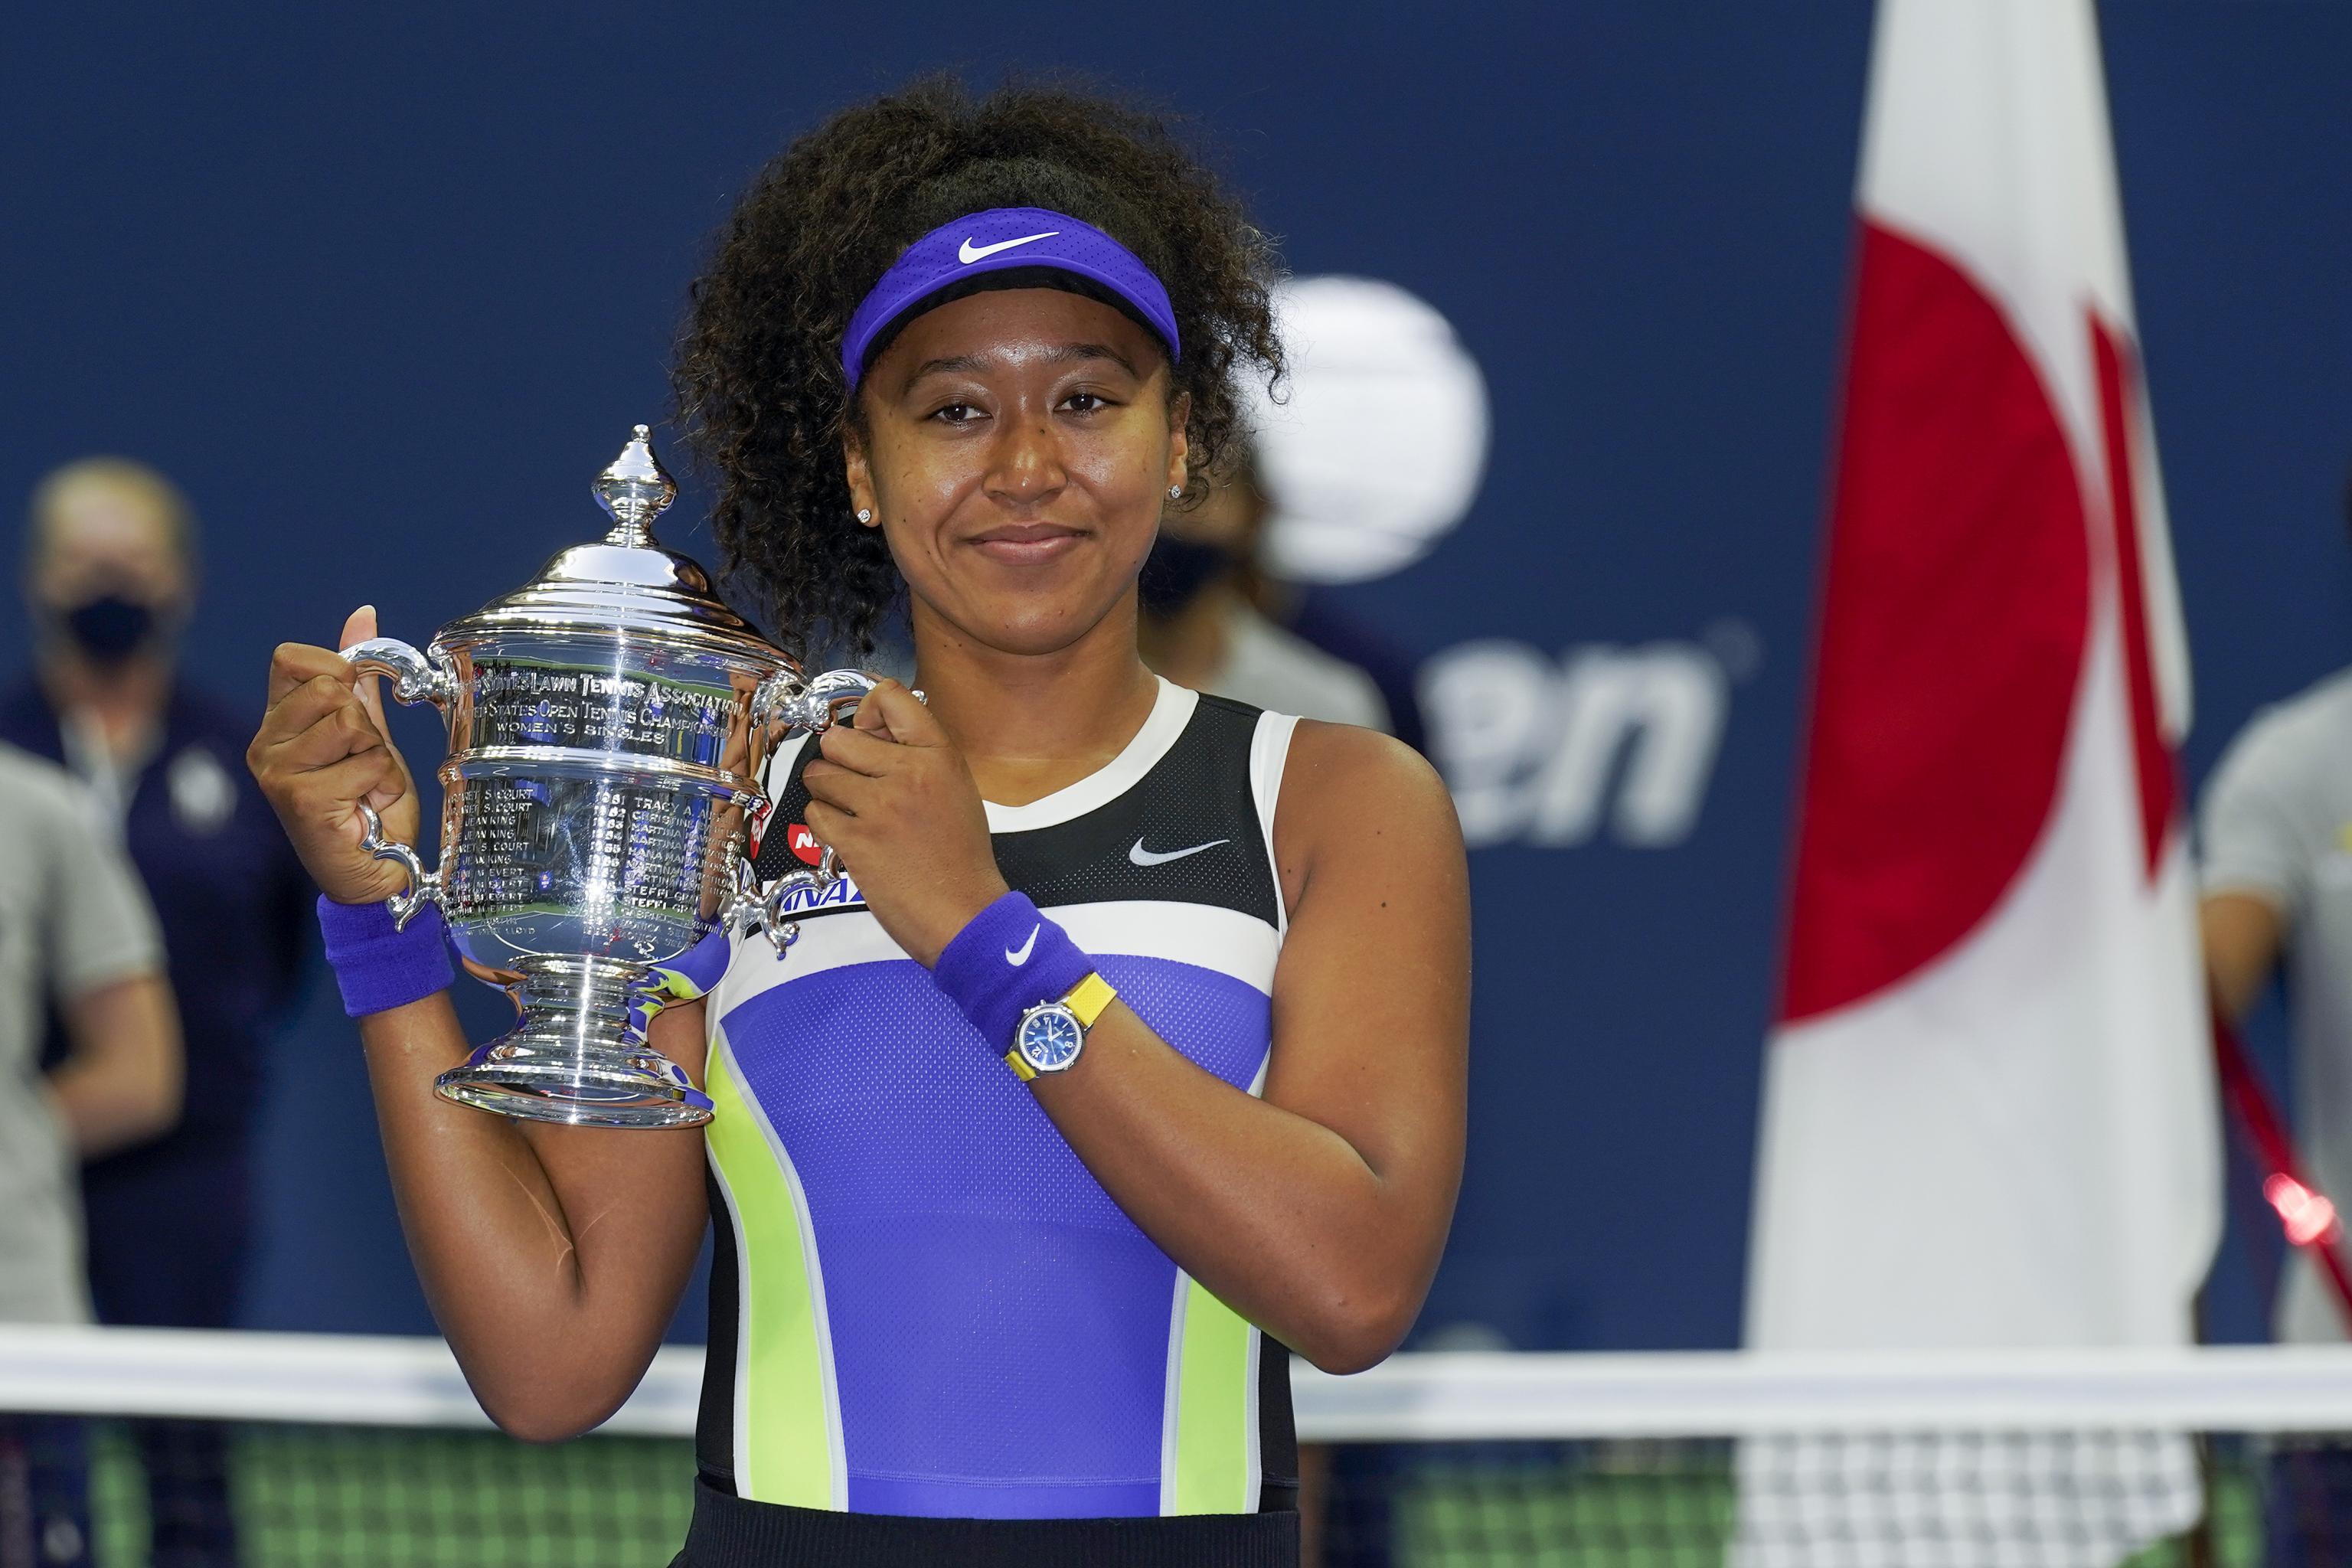 Us Open Tennis 2020 Results Final Look At Womens Bracket And Prize Money Bleacher Report Latest News Videos And Highlights